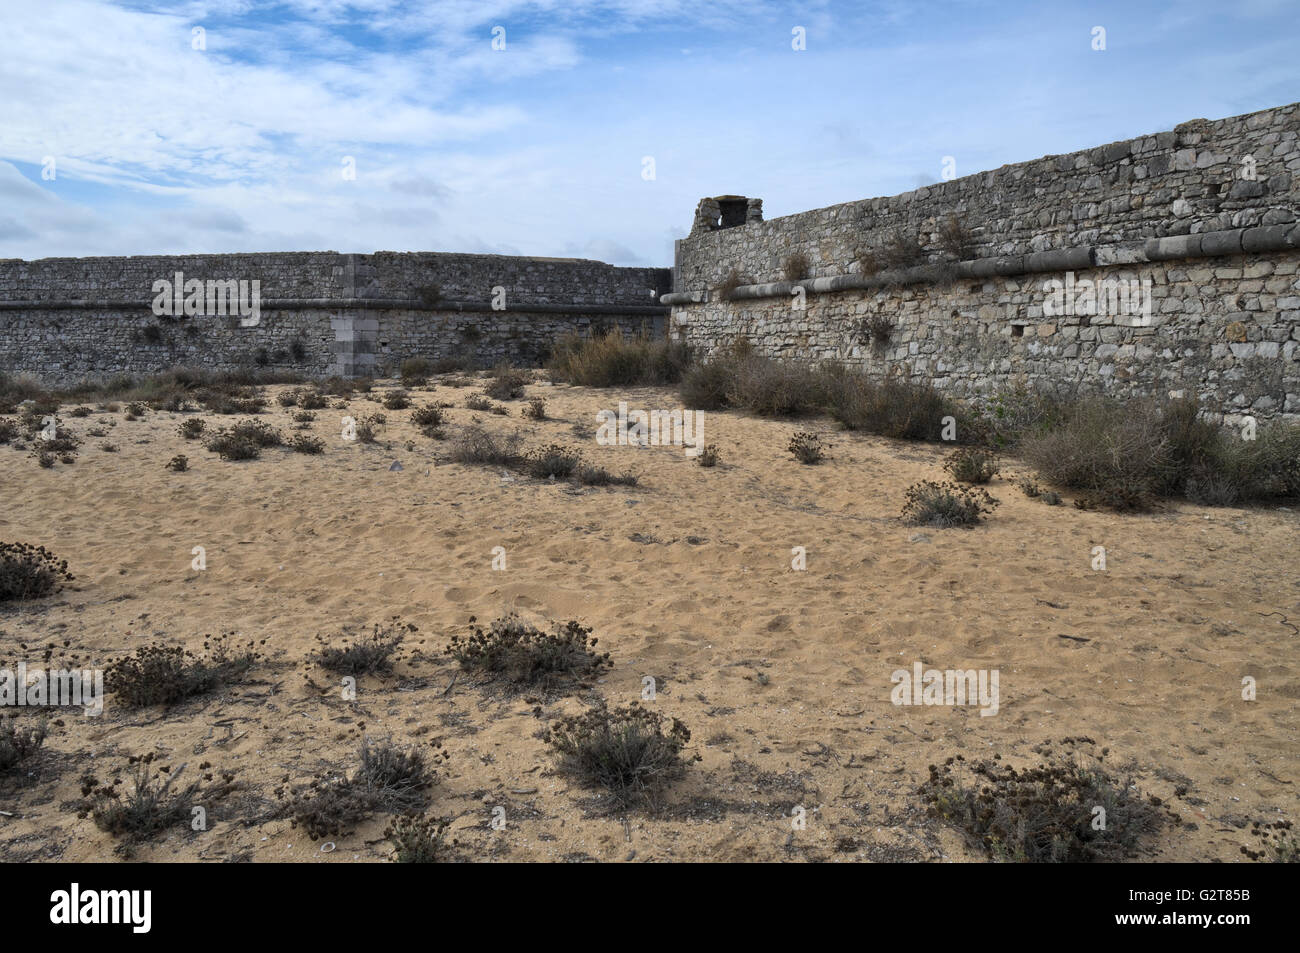 View of the historical ruins of Forte do Rato in Tavira. Travel and vacation destinations. Stock Photo